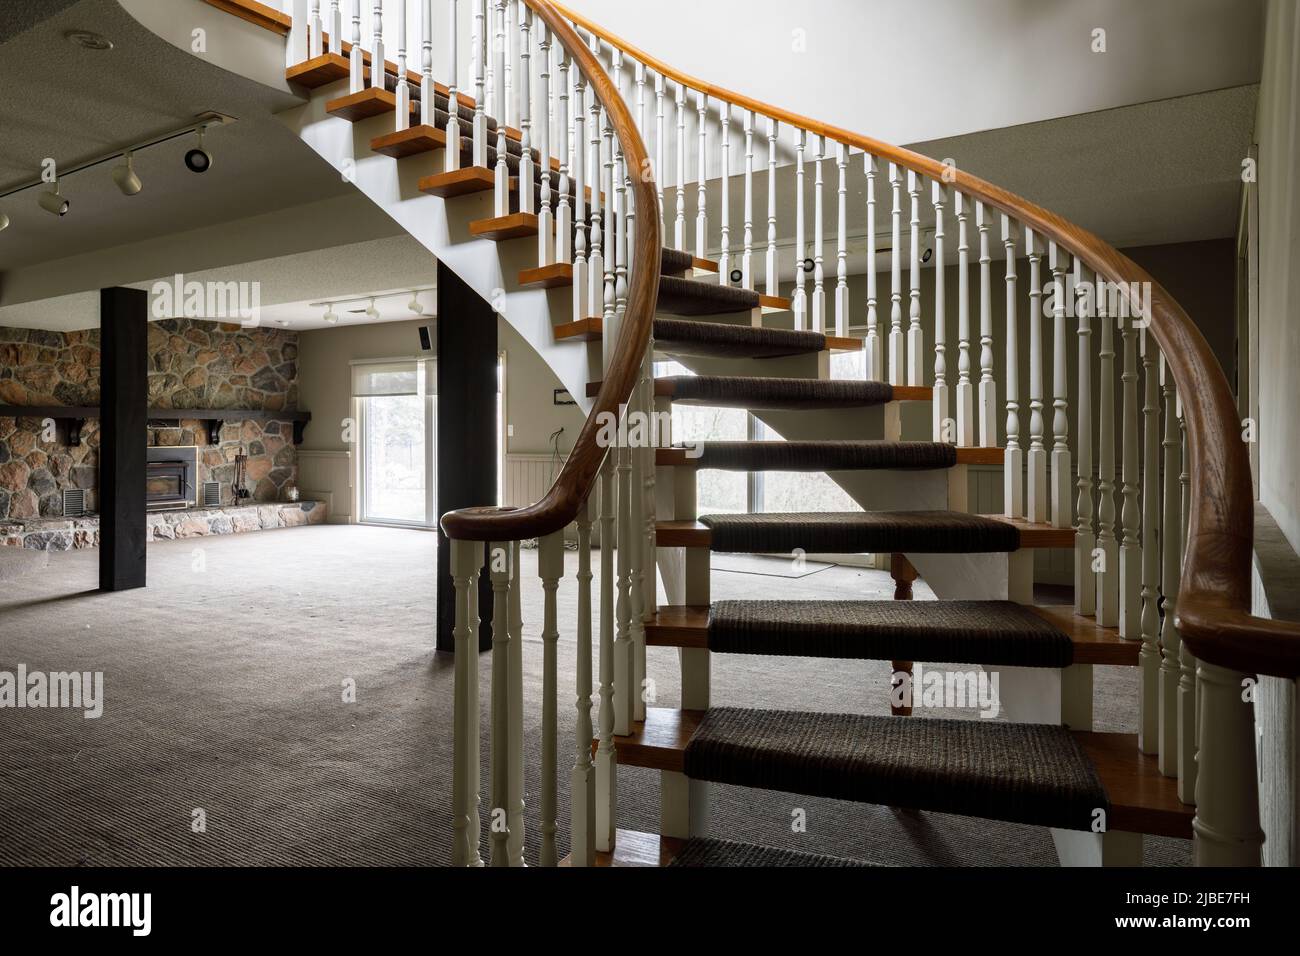 A curved staircase inside a house. This house has since been demolished. Stock Photo